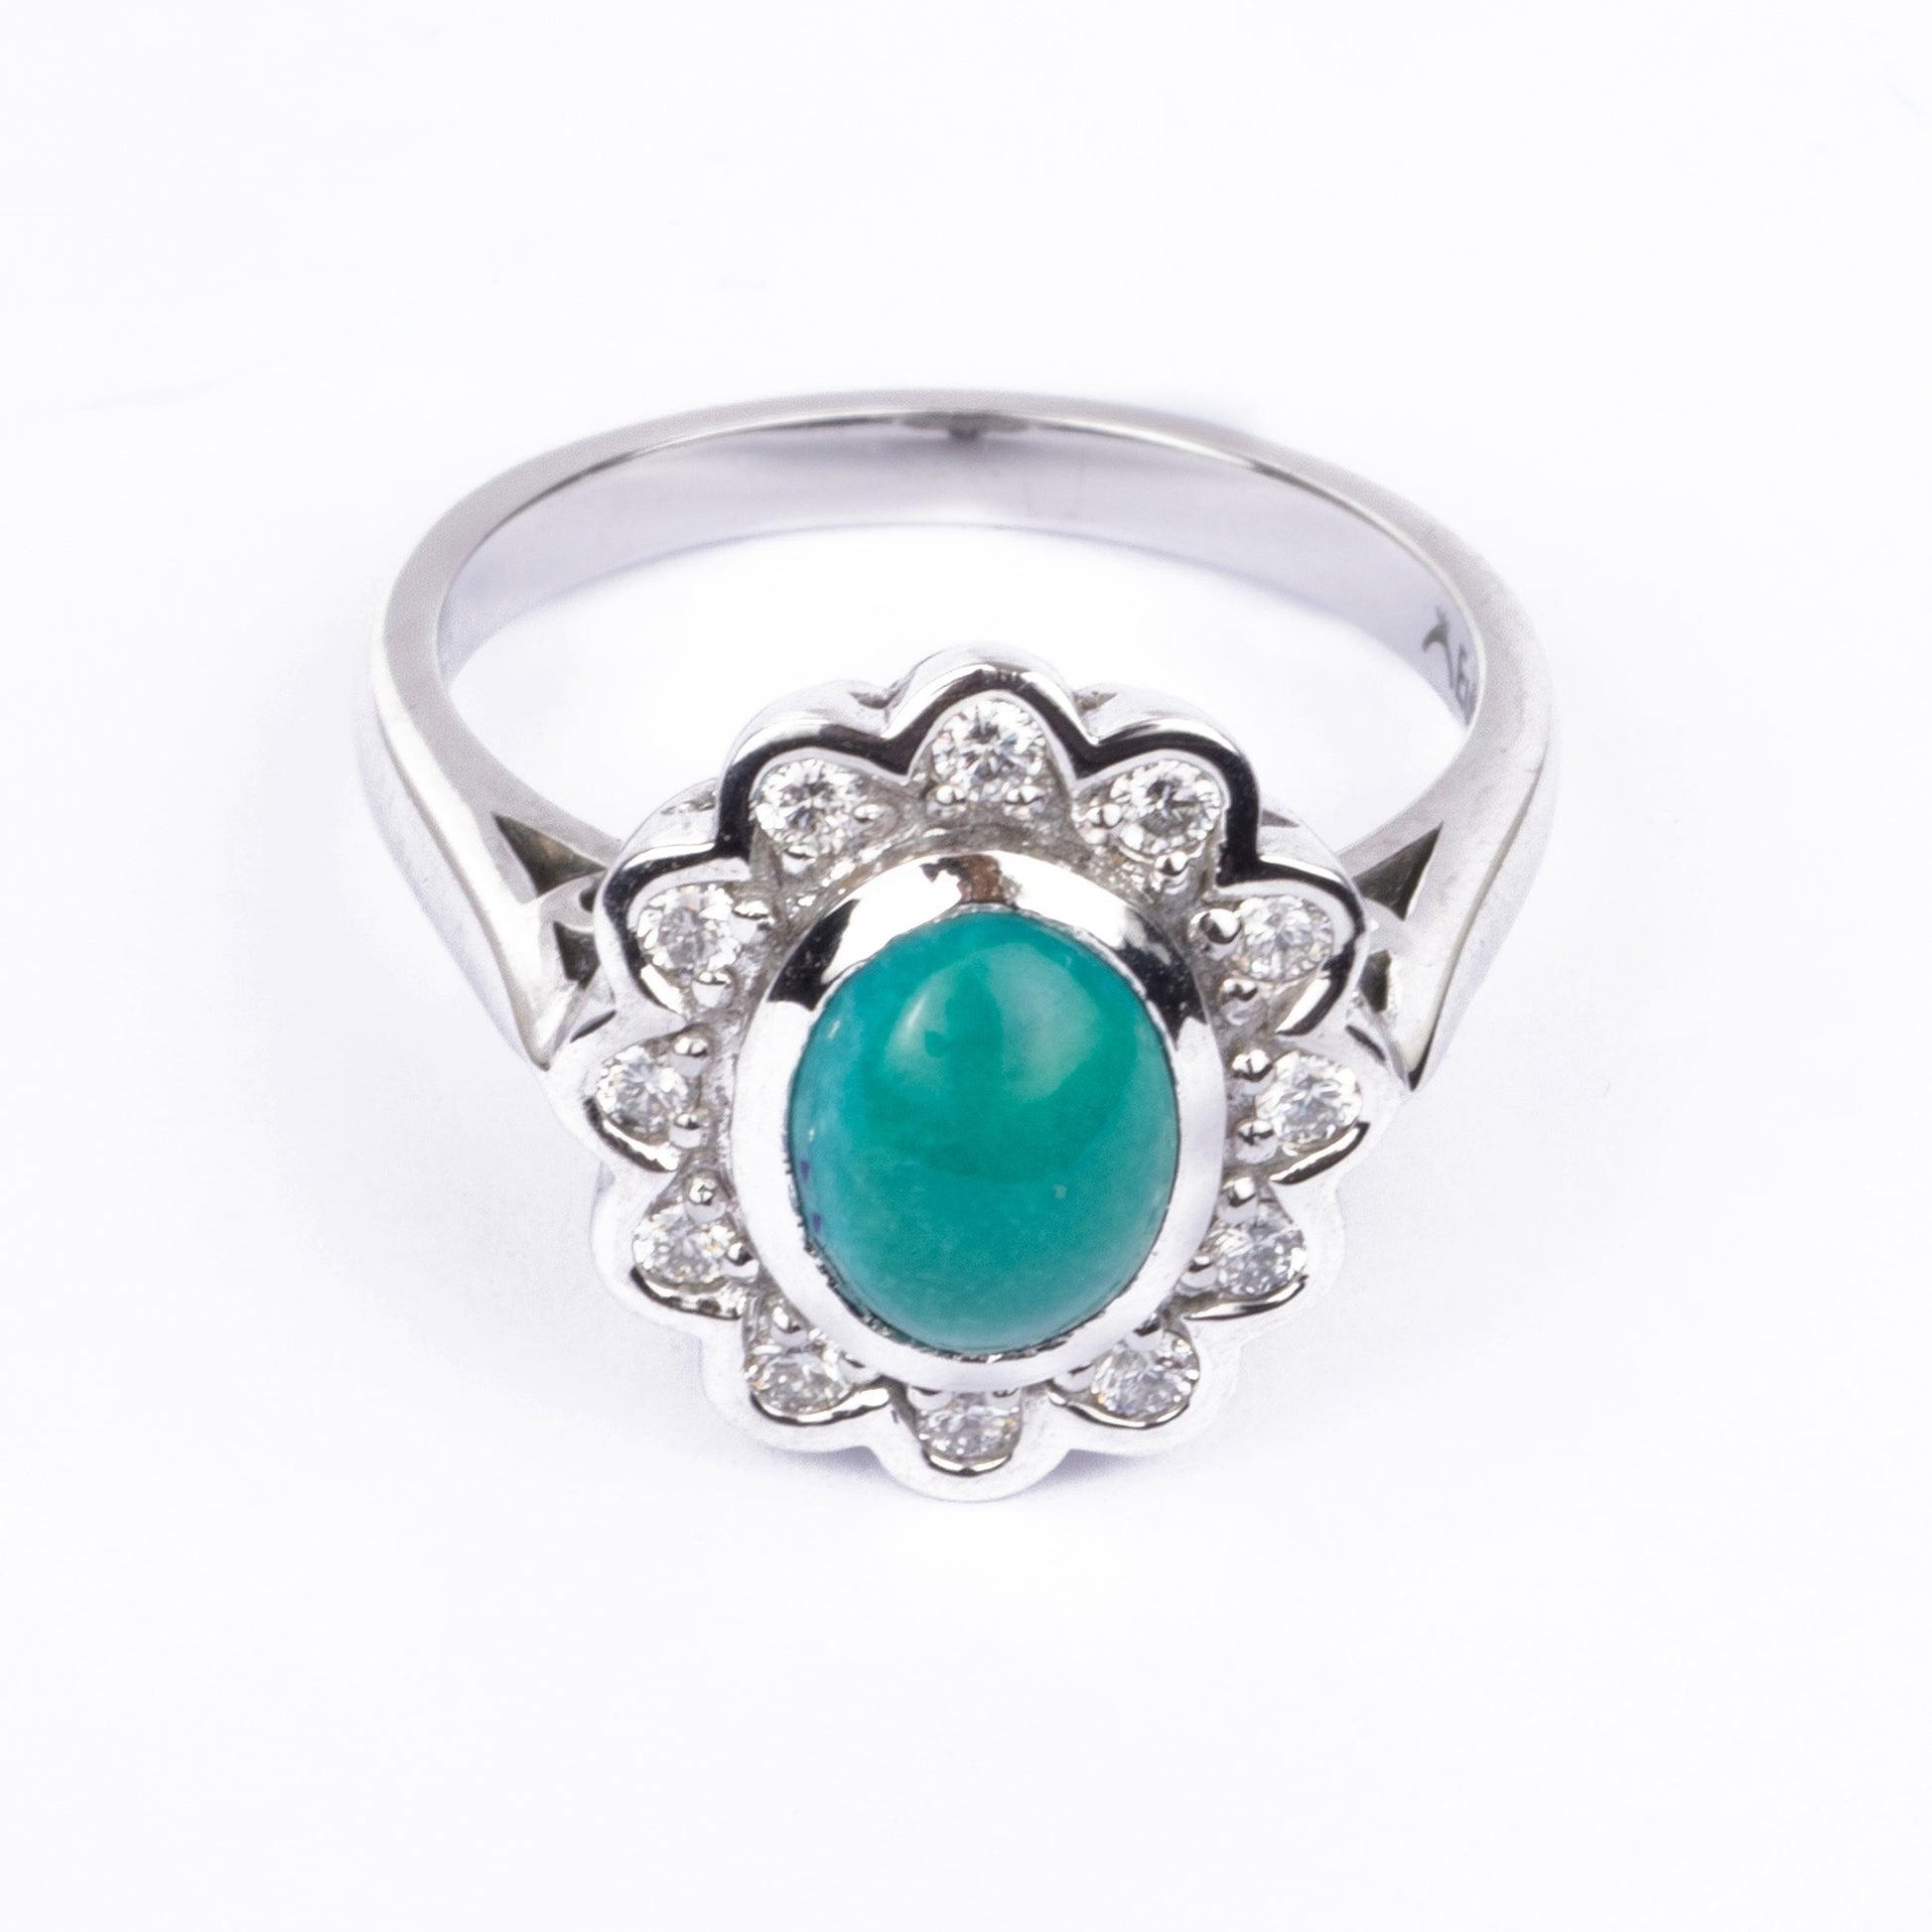 18ct White Gold Diamond and Turquoise Cocktail Ring LR-2971 - Minar Jewellers